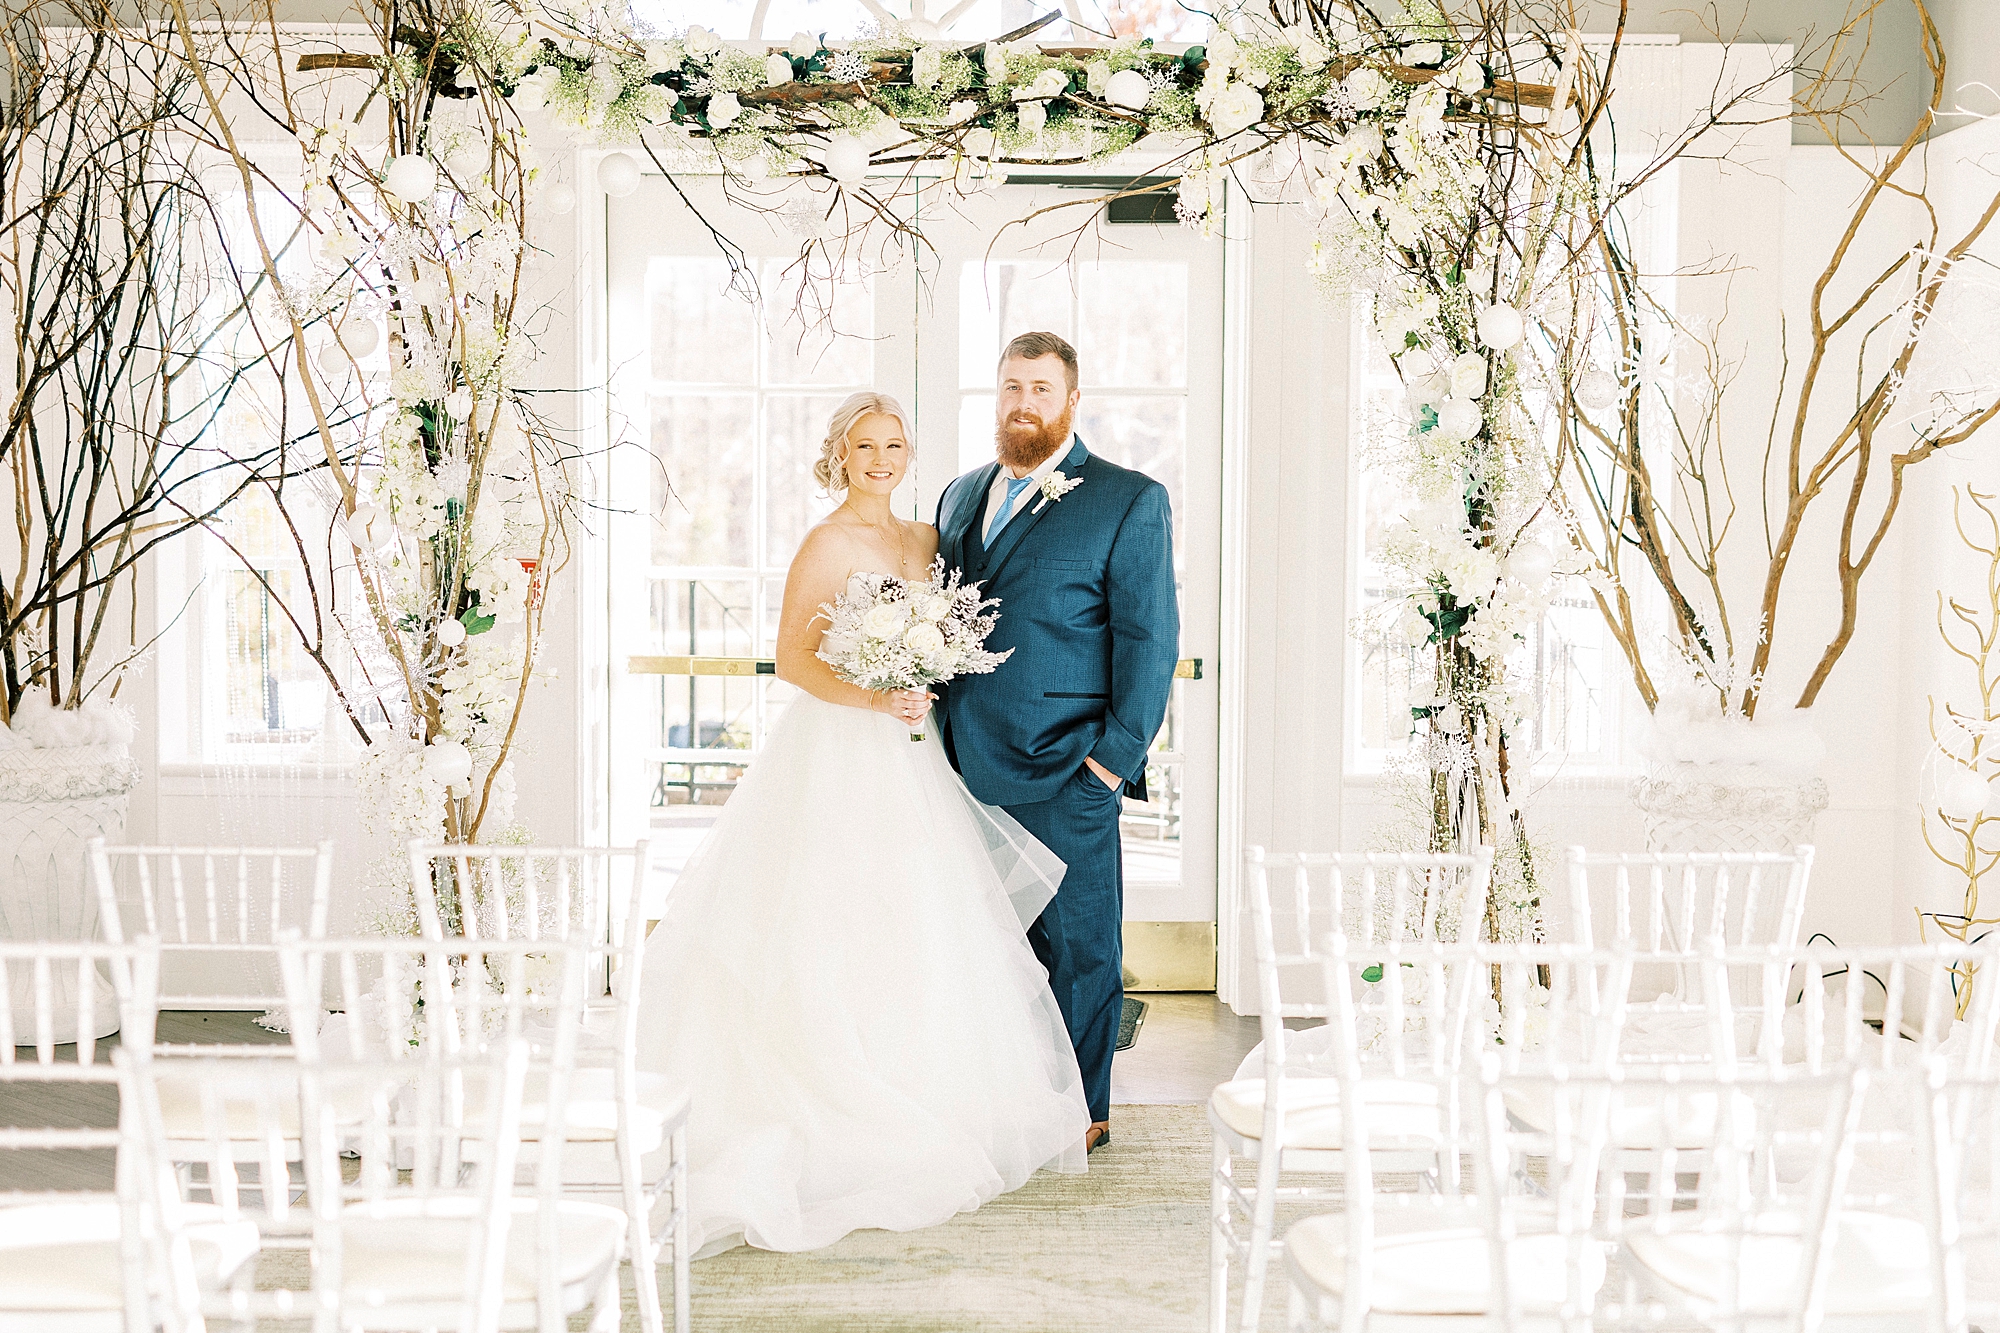 newlyweds pose under arbor for winter wonderland wedding at River Run Country Club